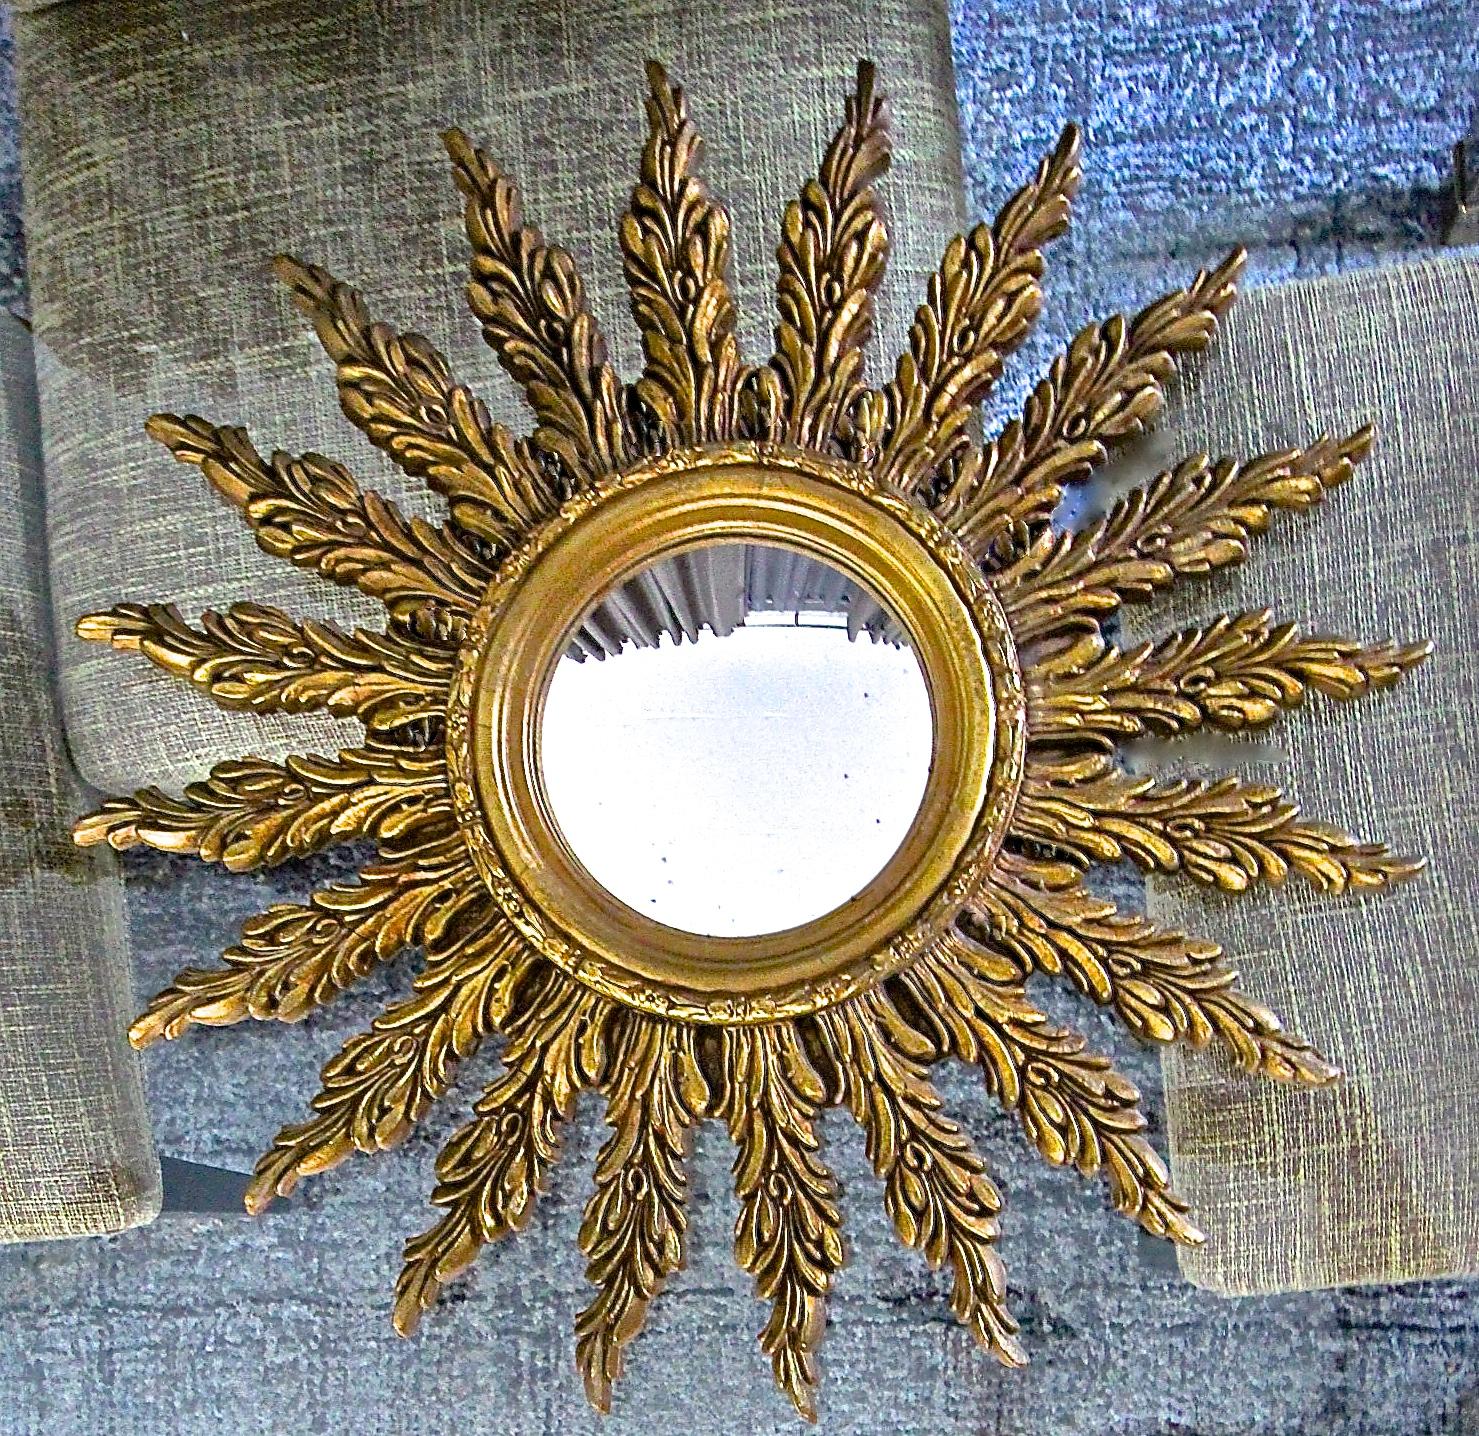 French round gilt wood sunburst or starburst wall mirror with antiqued convex mirror. Wall mirror is combination of composition and wood. Overall diameter of mirror 25.5